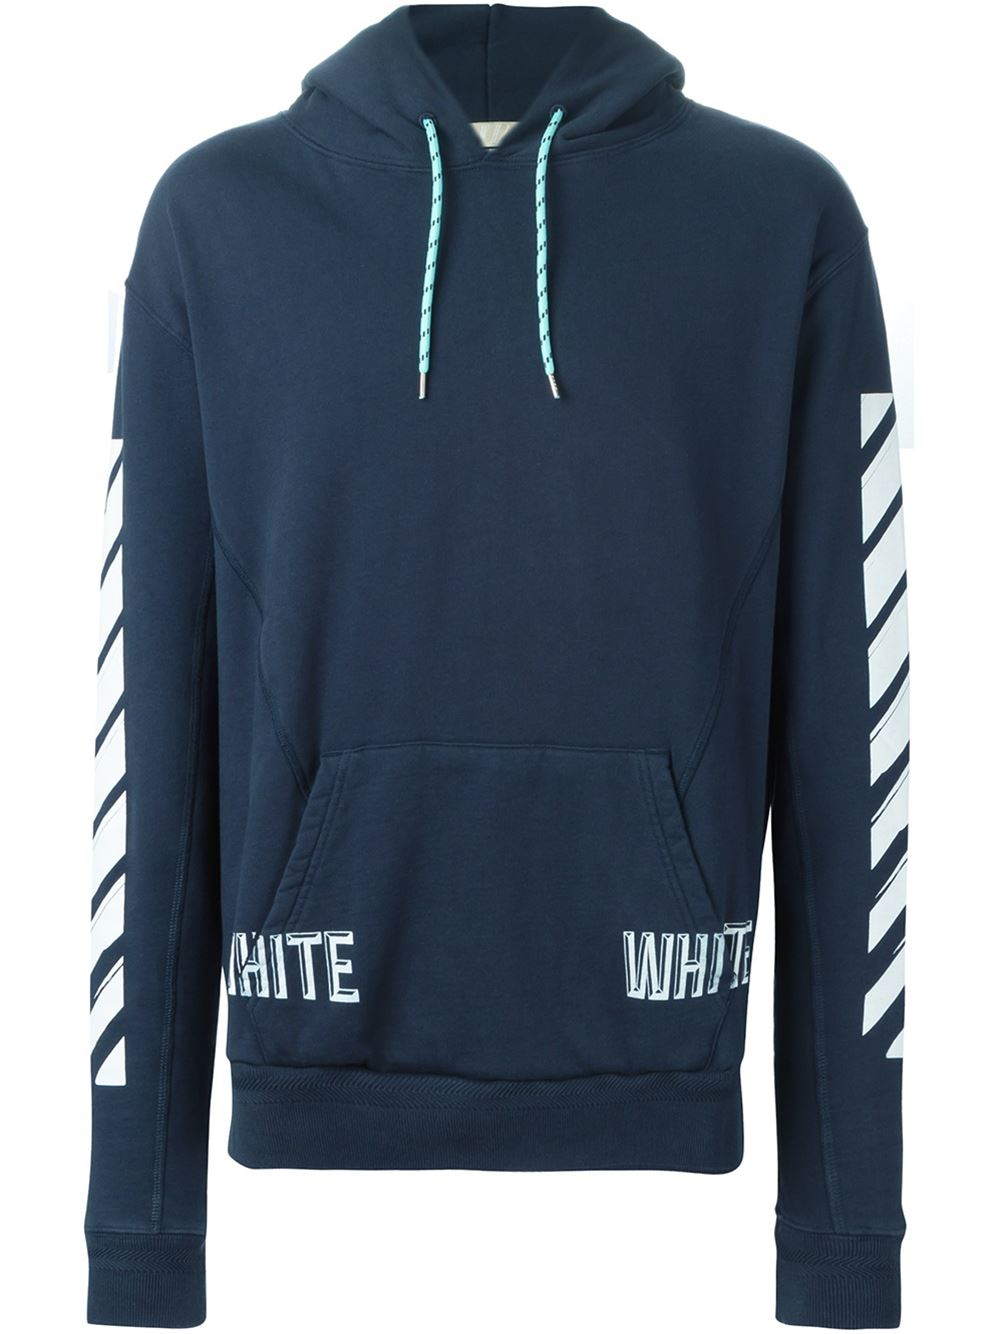 Lyst - Off-White C/O Virgil Abloh Striped Sleeve Hoodie in Blue for Men